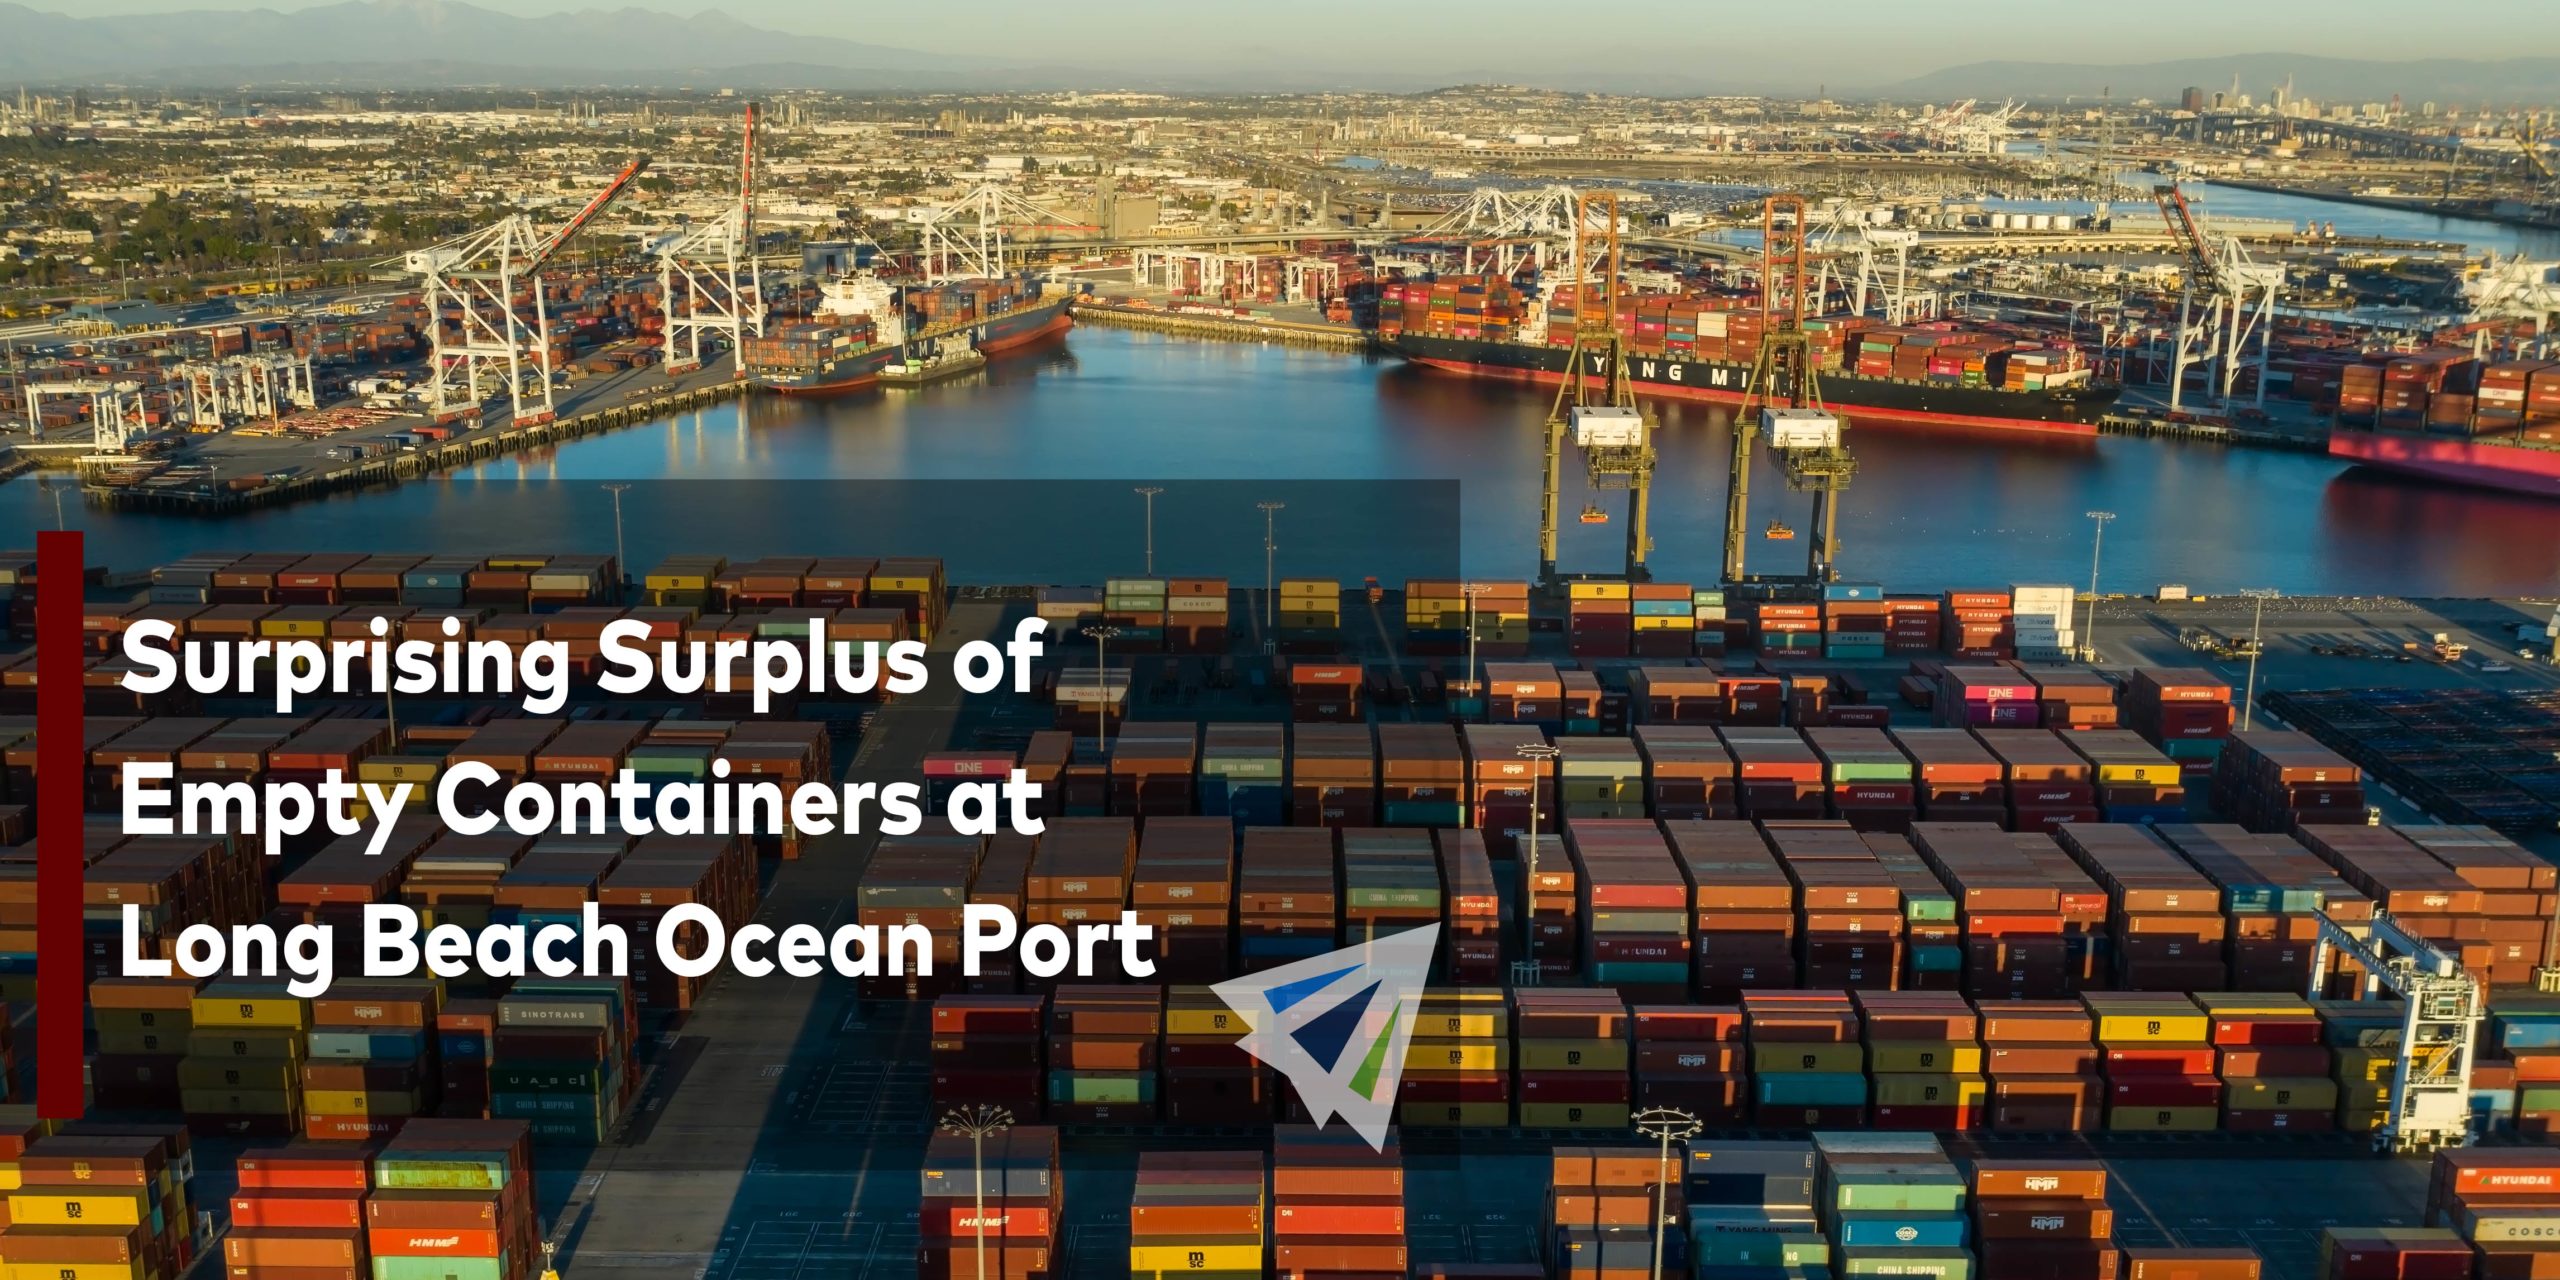 Surprising Surplus of Empty Containers at Long Beach Ocean Port